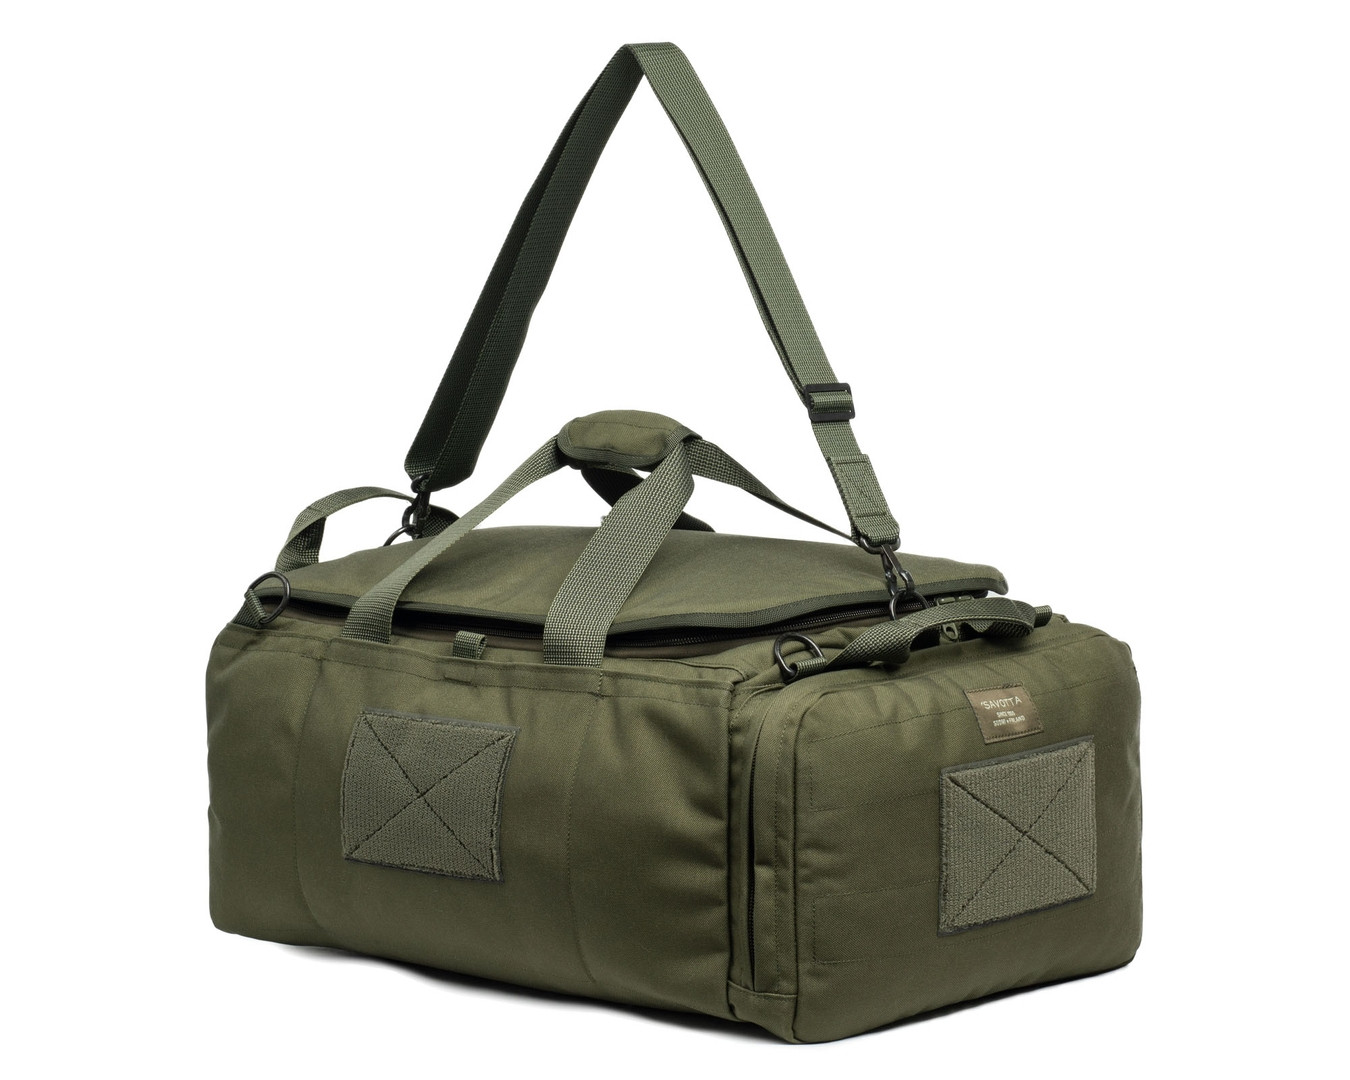 Y3 Duffle Bag Discount Collection, Save 67% | jlcatj.gob.mx